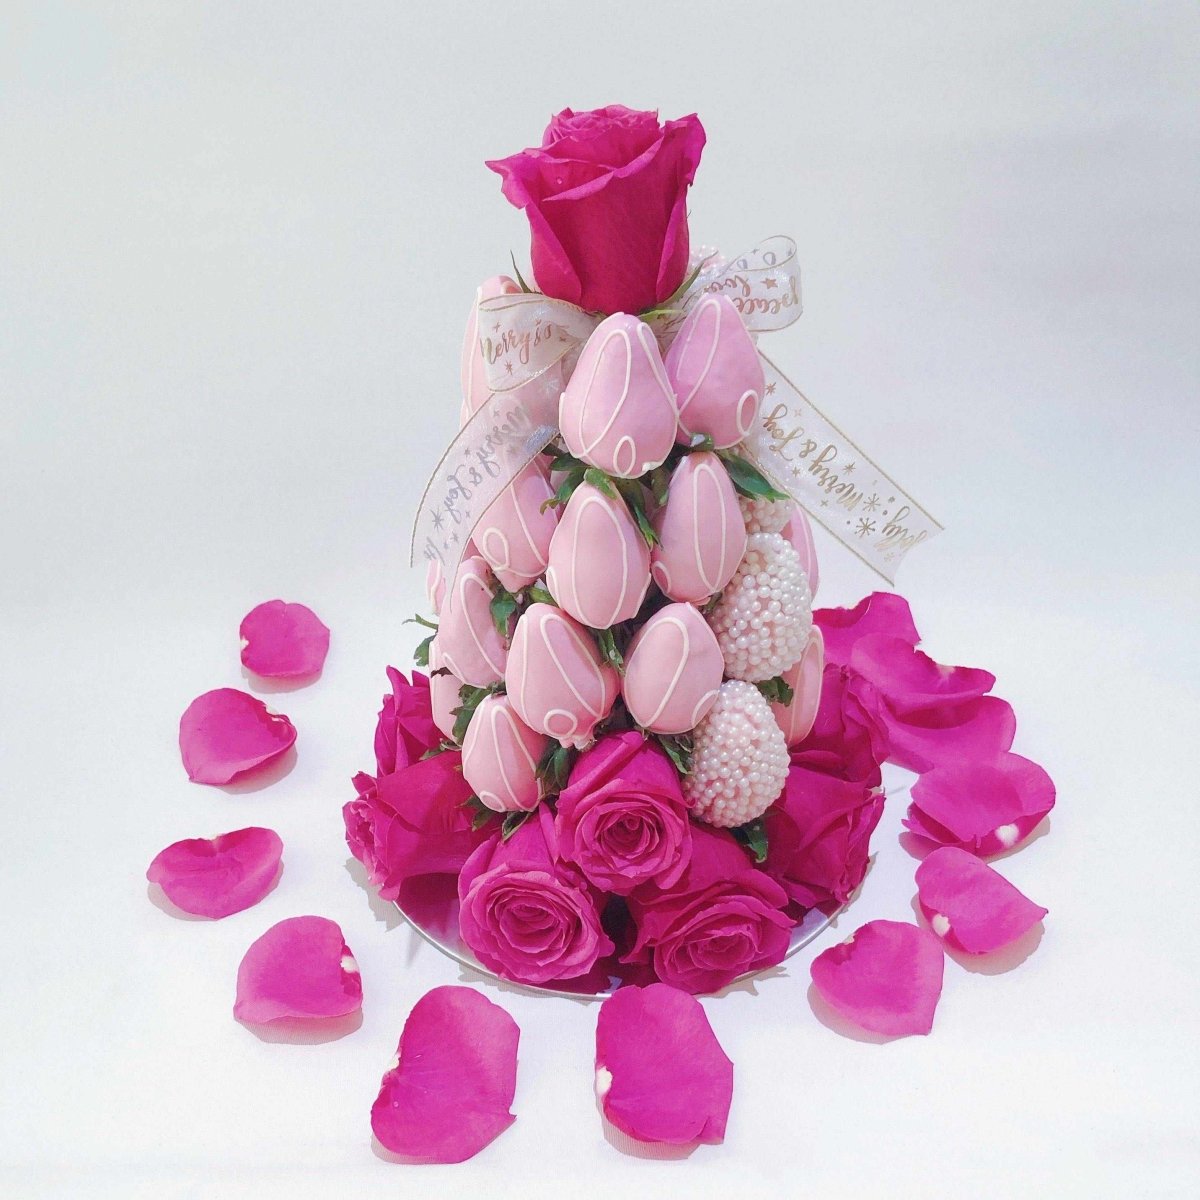 Blessed Love Strawberry Tower - Rainbowly Fresh Fruit Gift and Flower Arrangments